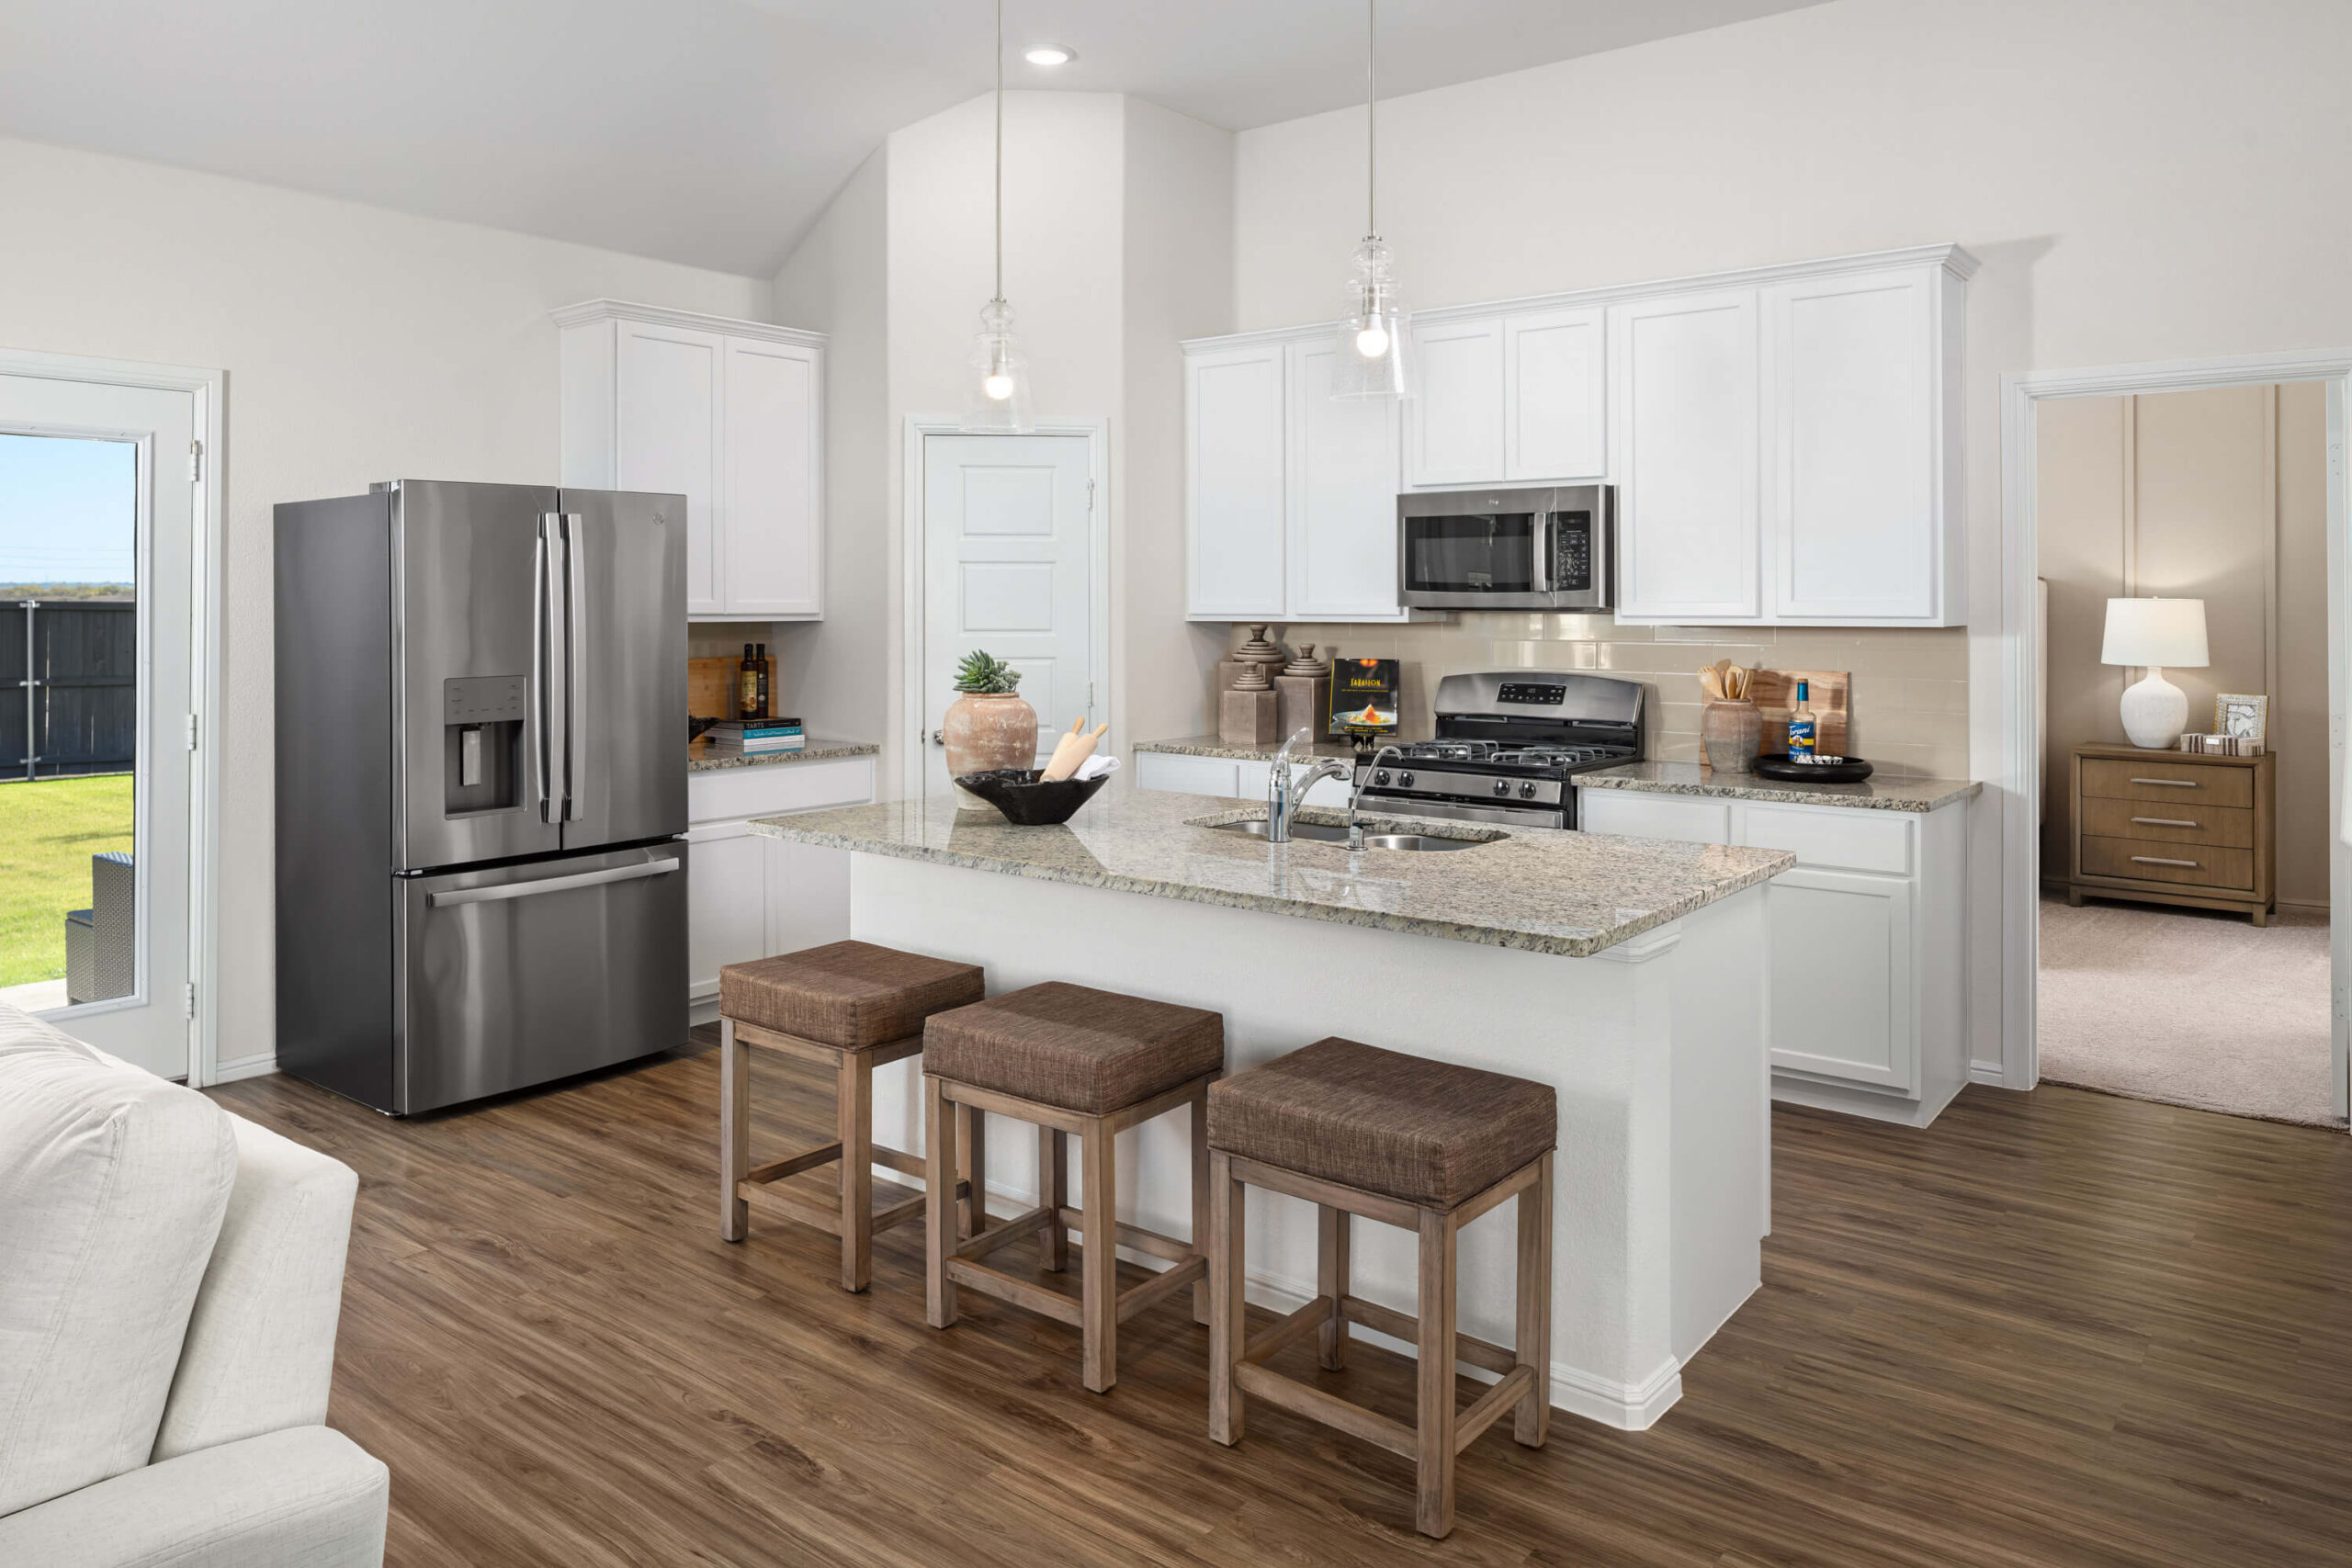 A modern kitchen interior in one of the new home communities in Mansfield TX, featuring white cabinetry, stainless steel appliances, and a central island with bar stools.